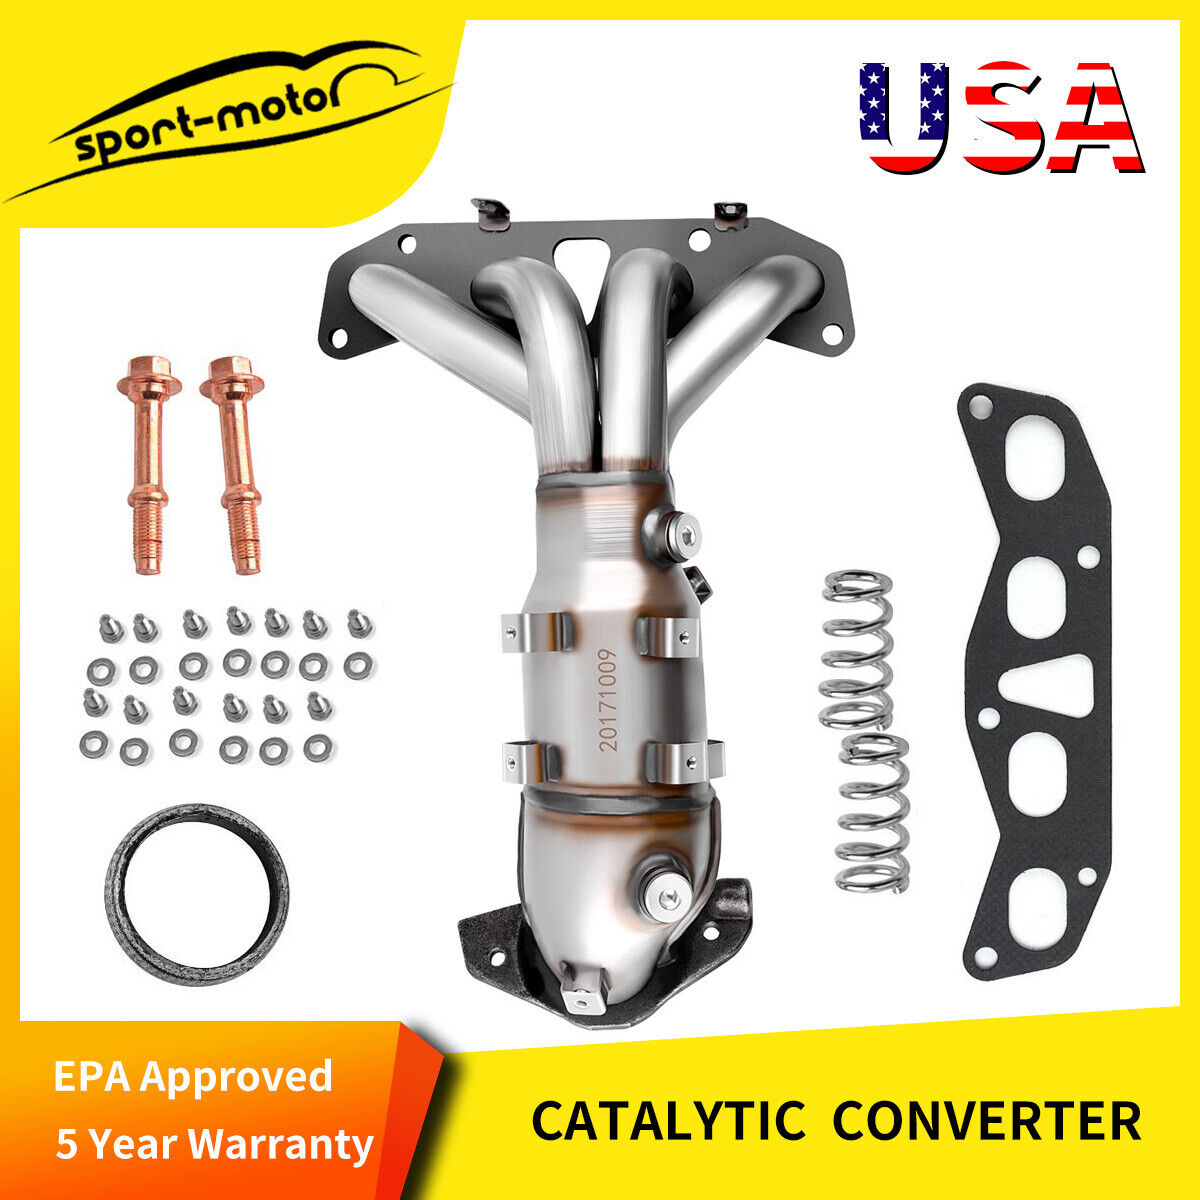 Exhaust Manifold w/ Catalytic Converter 2.5L for 02-06 Nissan Altima Sentra EPA